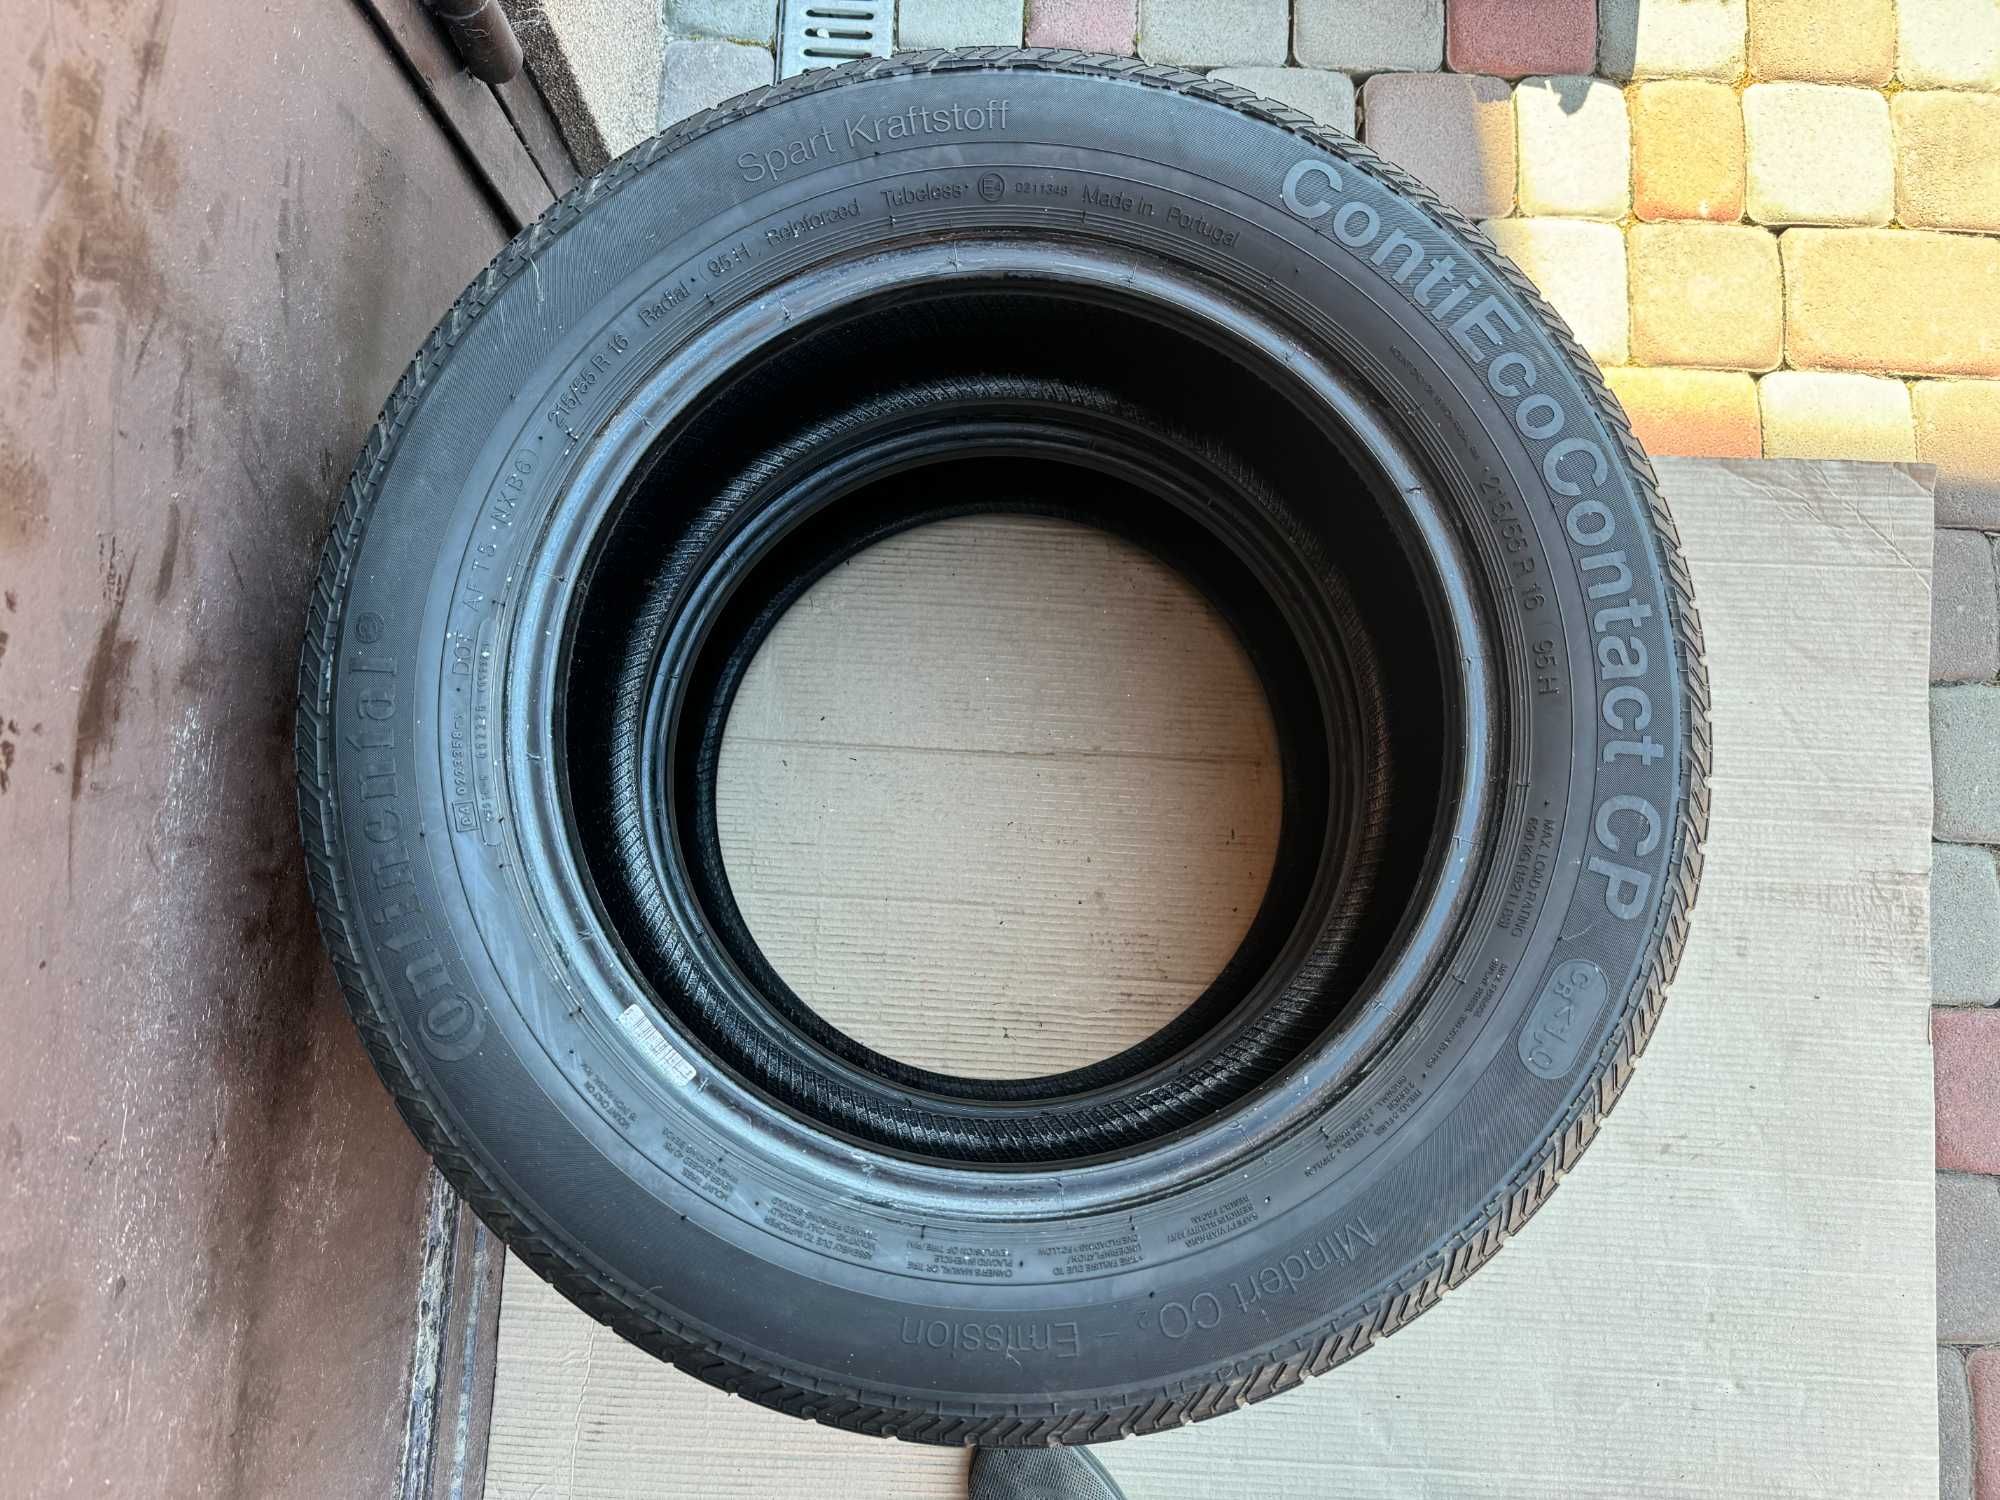 Шини Continental 215/55 R-16 (95 H ) made in Portugal- літо